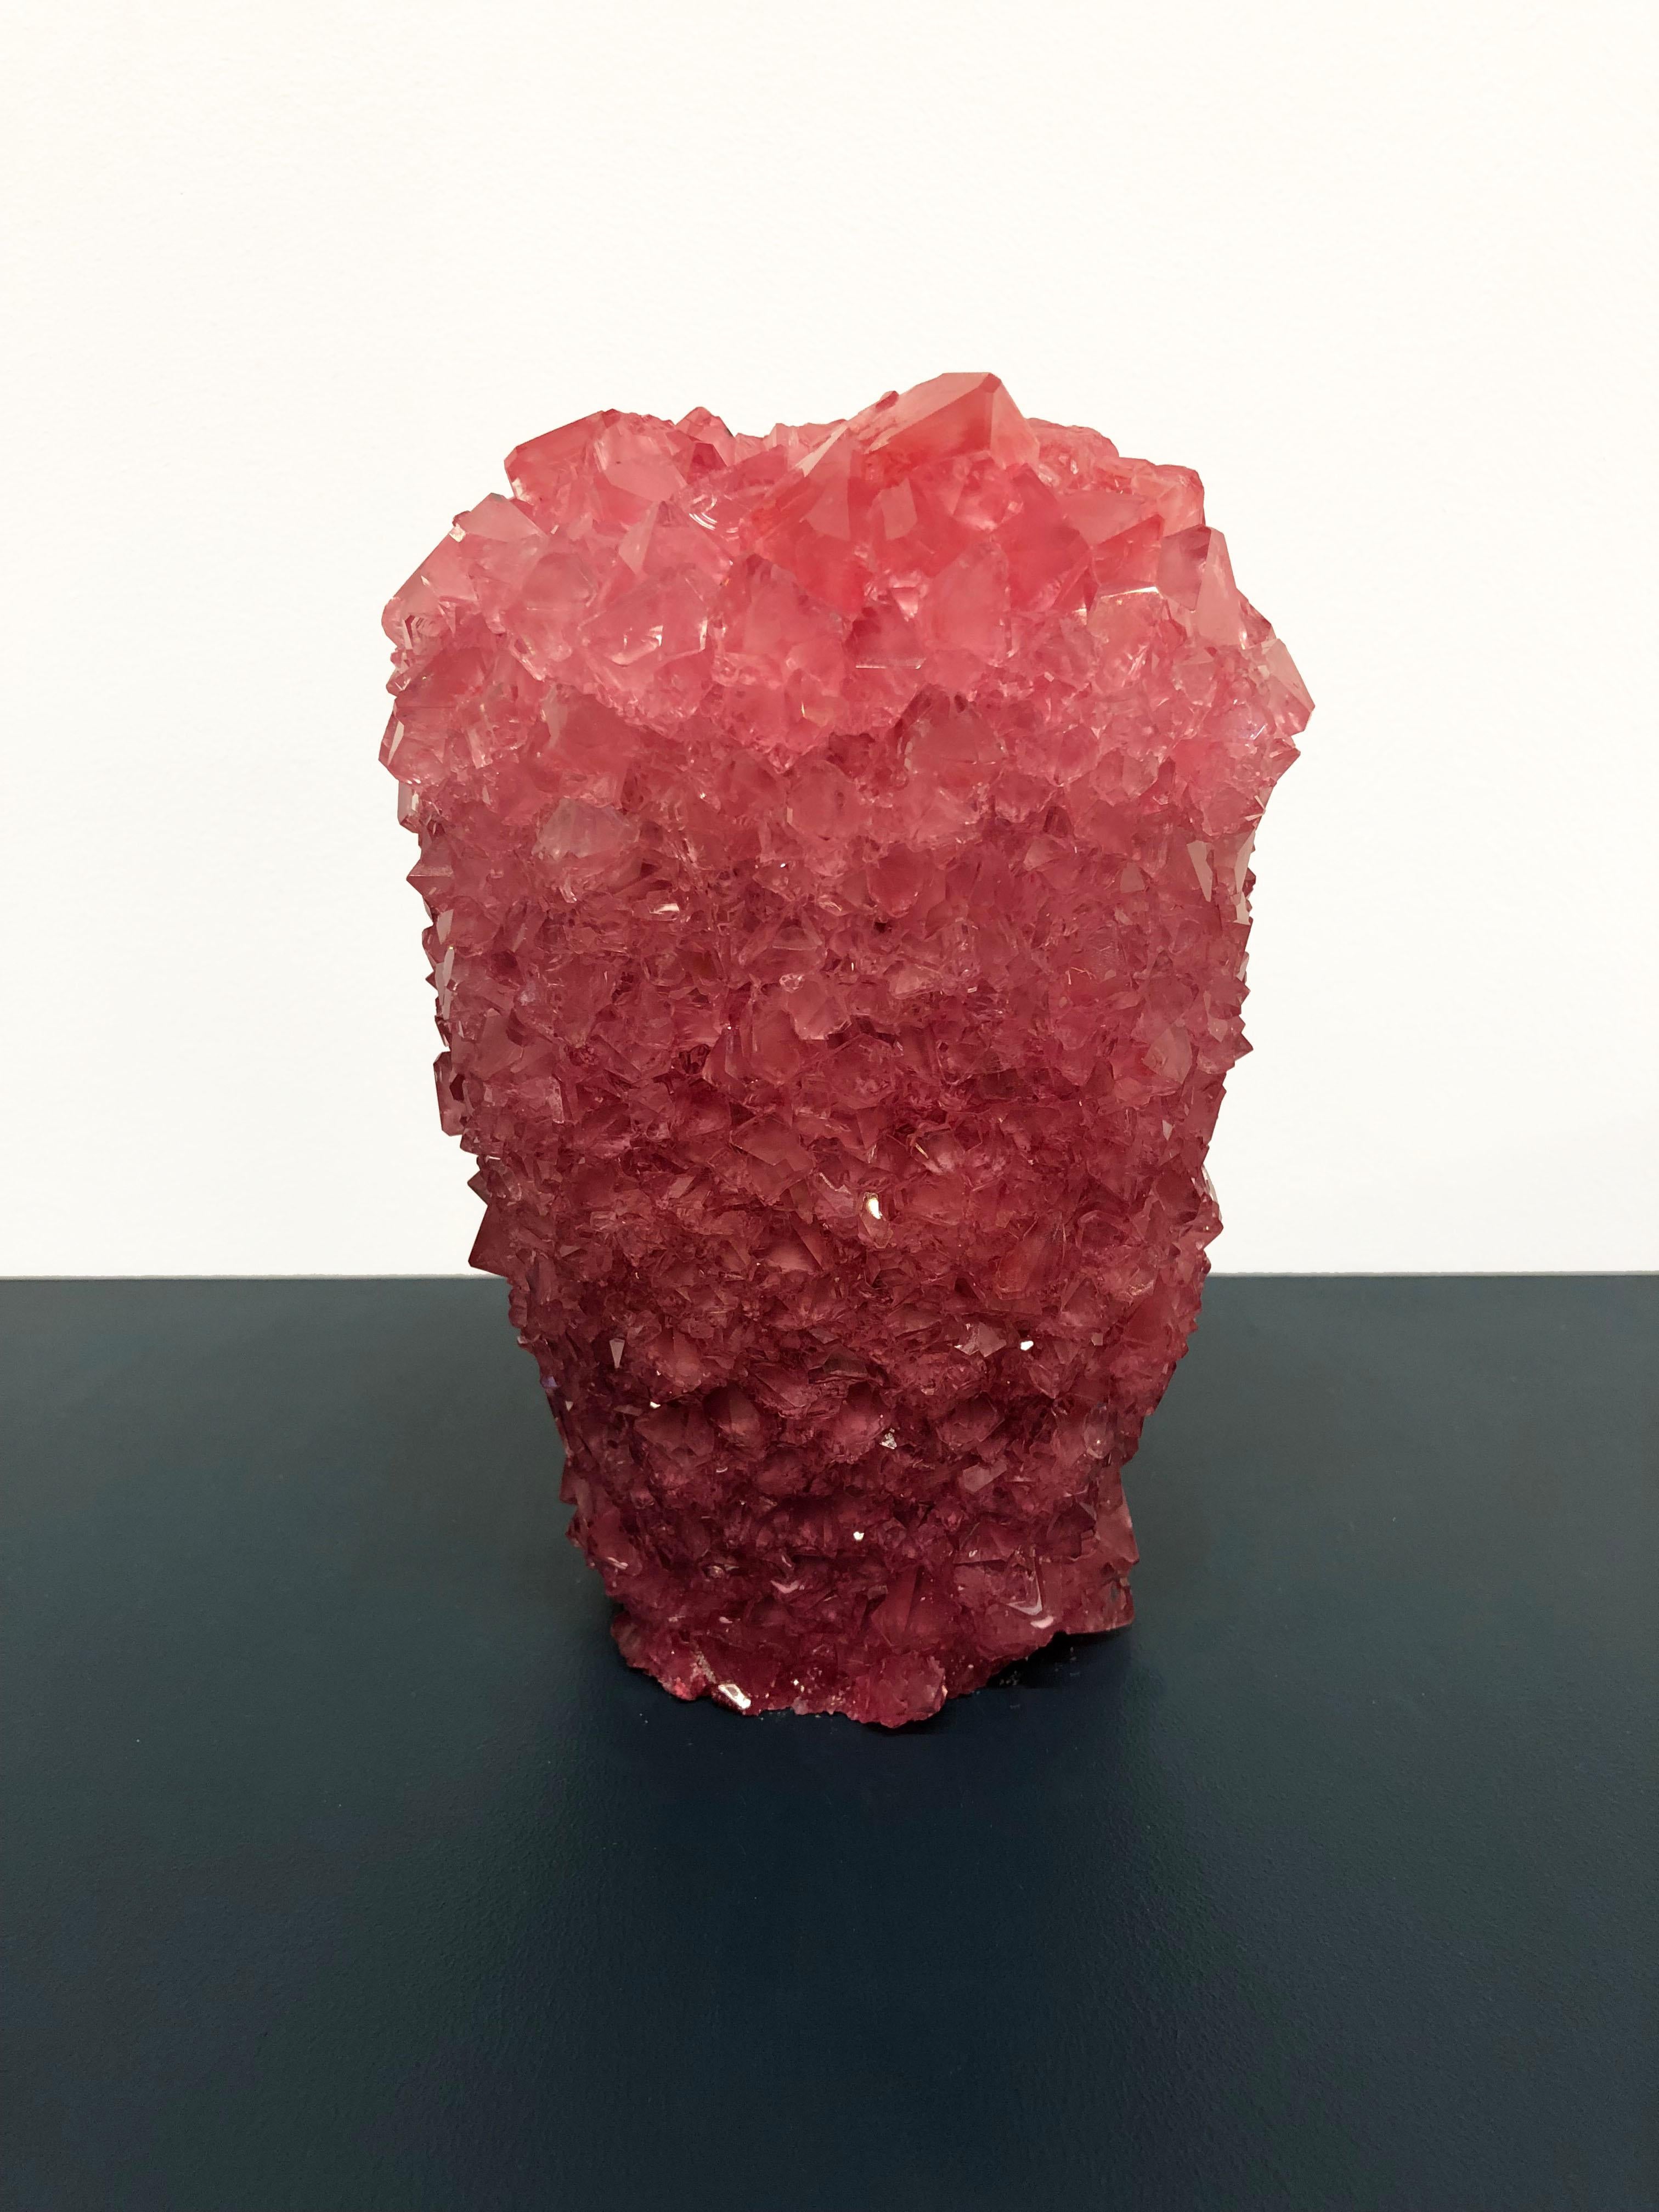 The ‘Crystal’ series is the result of research into stalagmites, one of the greatest wonders of nature. The growing process of the objects can be seen as a metaphor for time. Each object is unique in shape, colour and texture, due to the organic